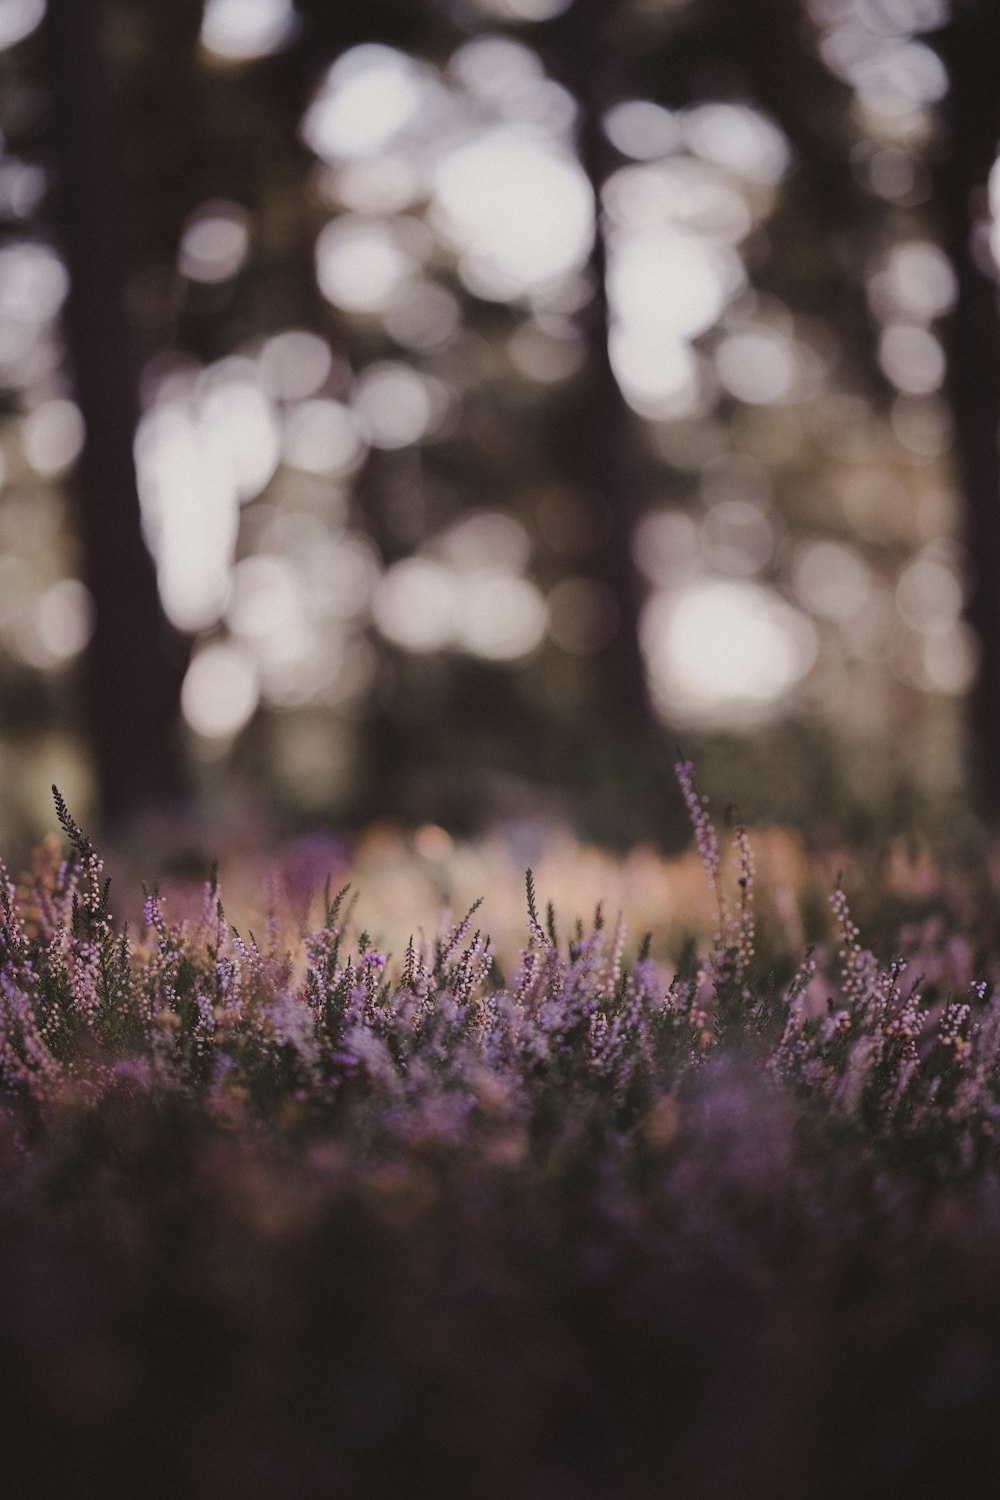 a field of purple flowers with trees in the background